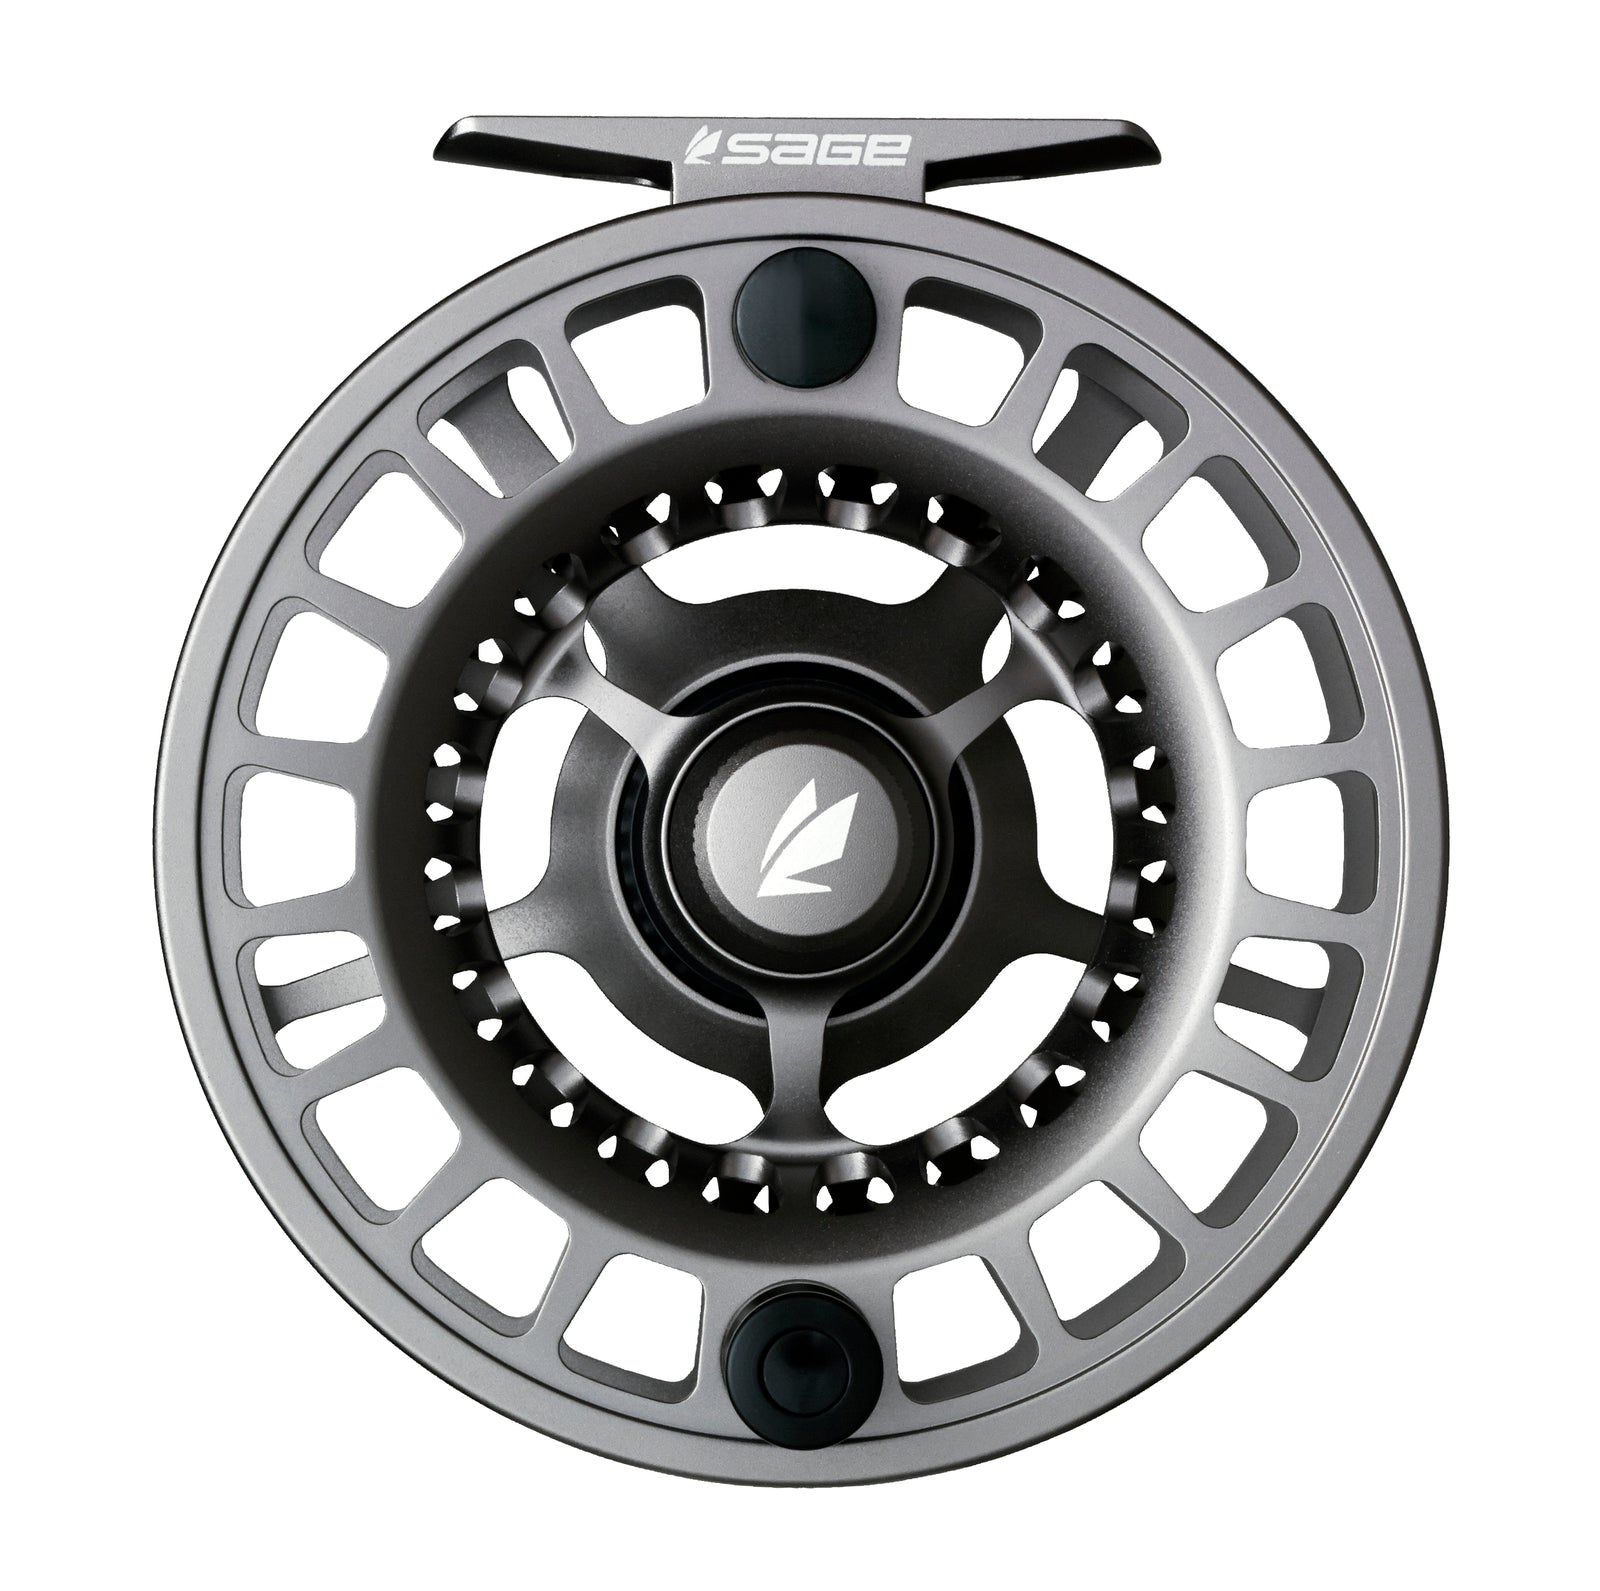 Spectrum Reel Black 5-6wt36661 - Gordy & Sons Outfitters